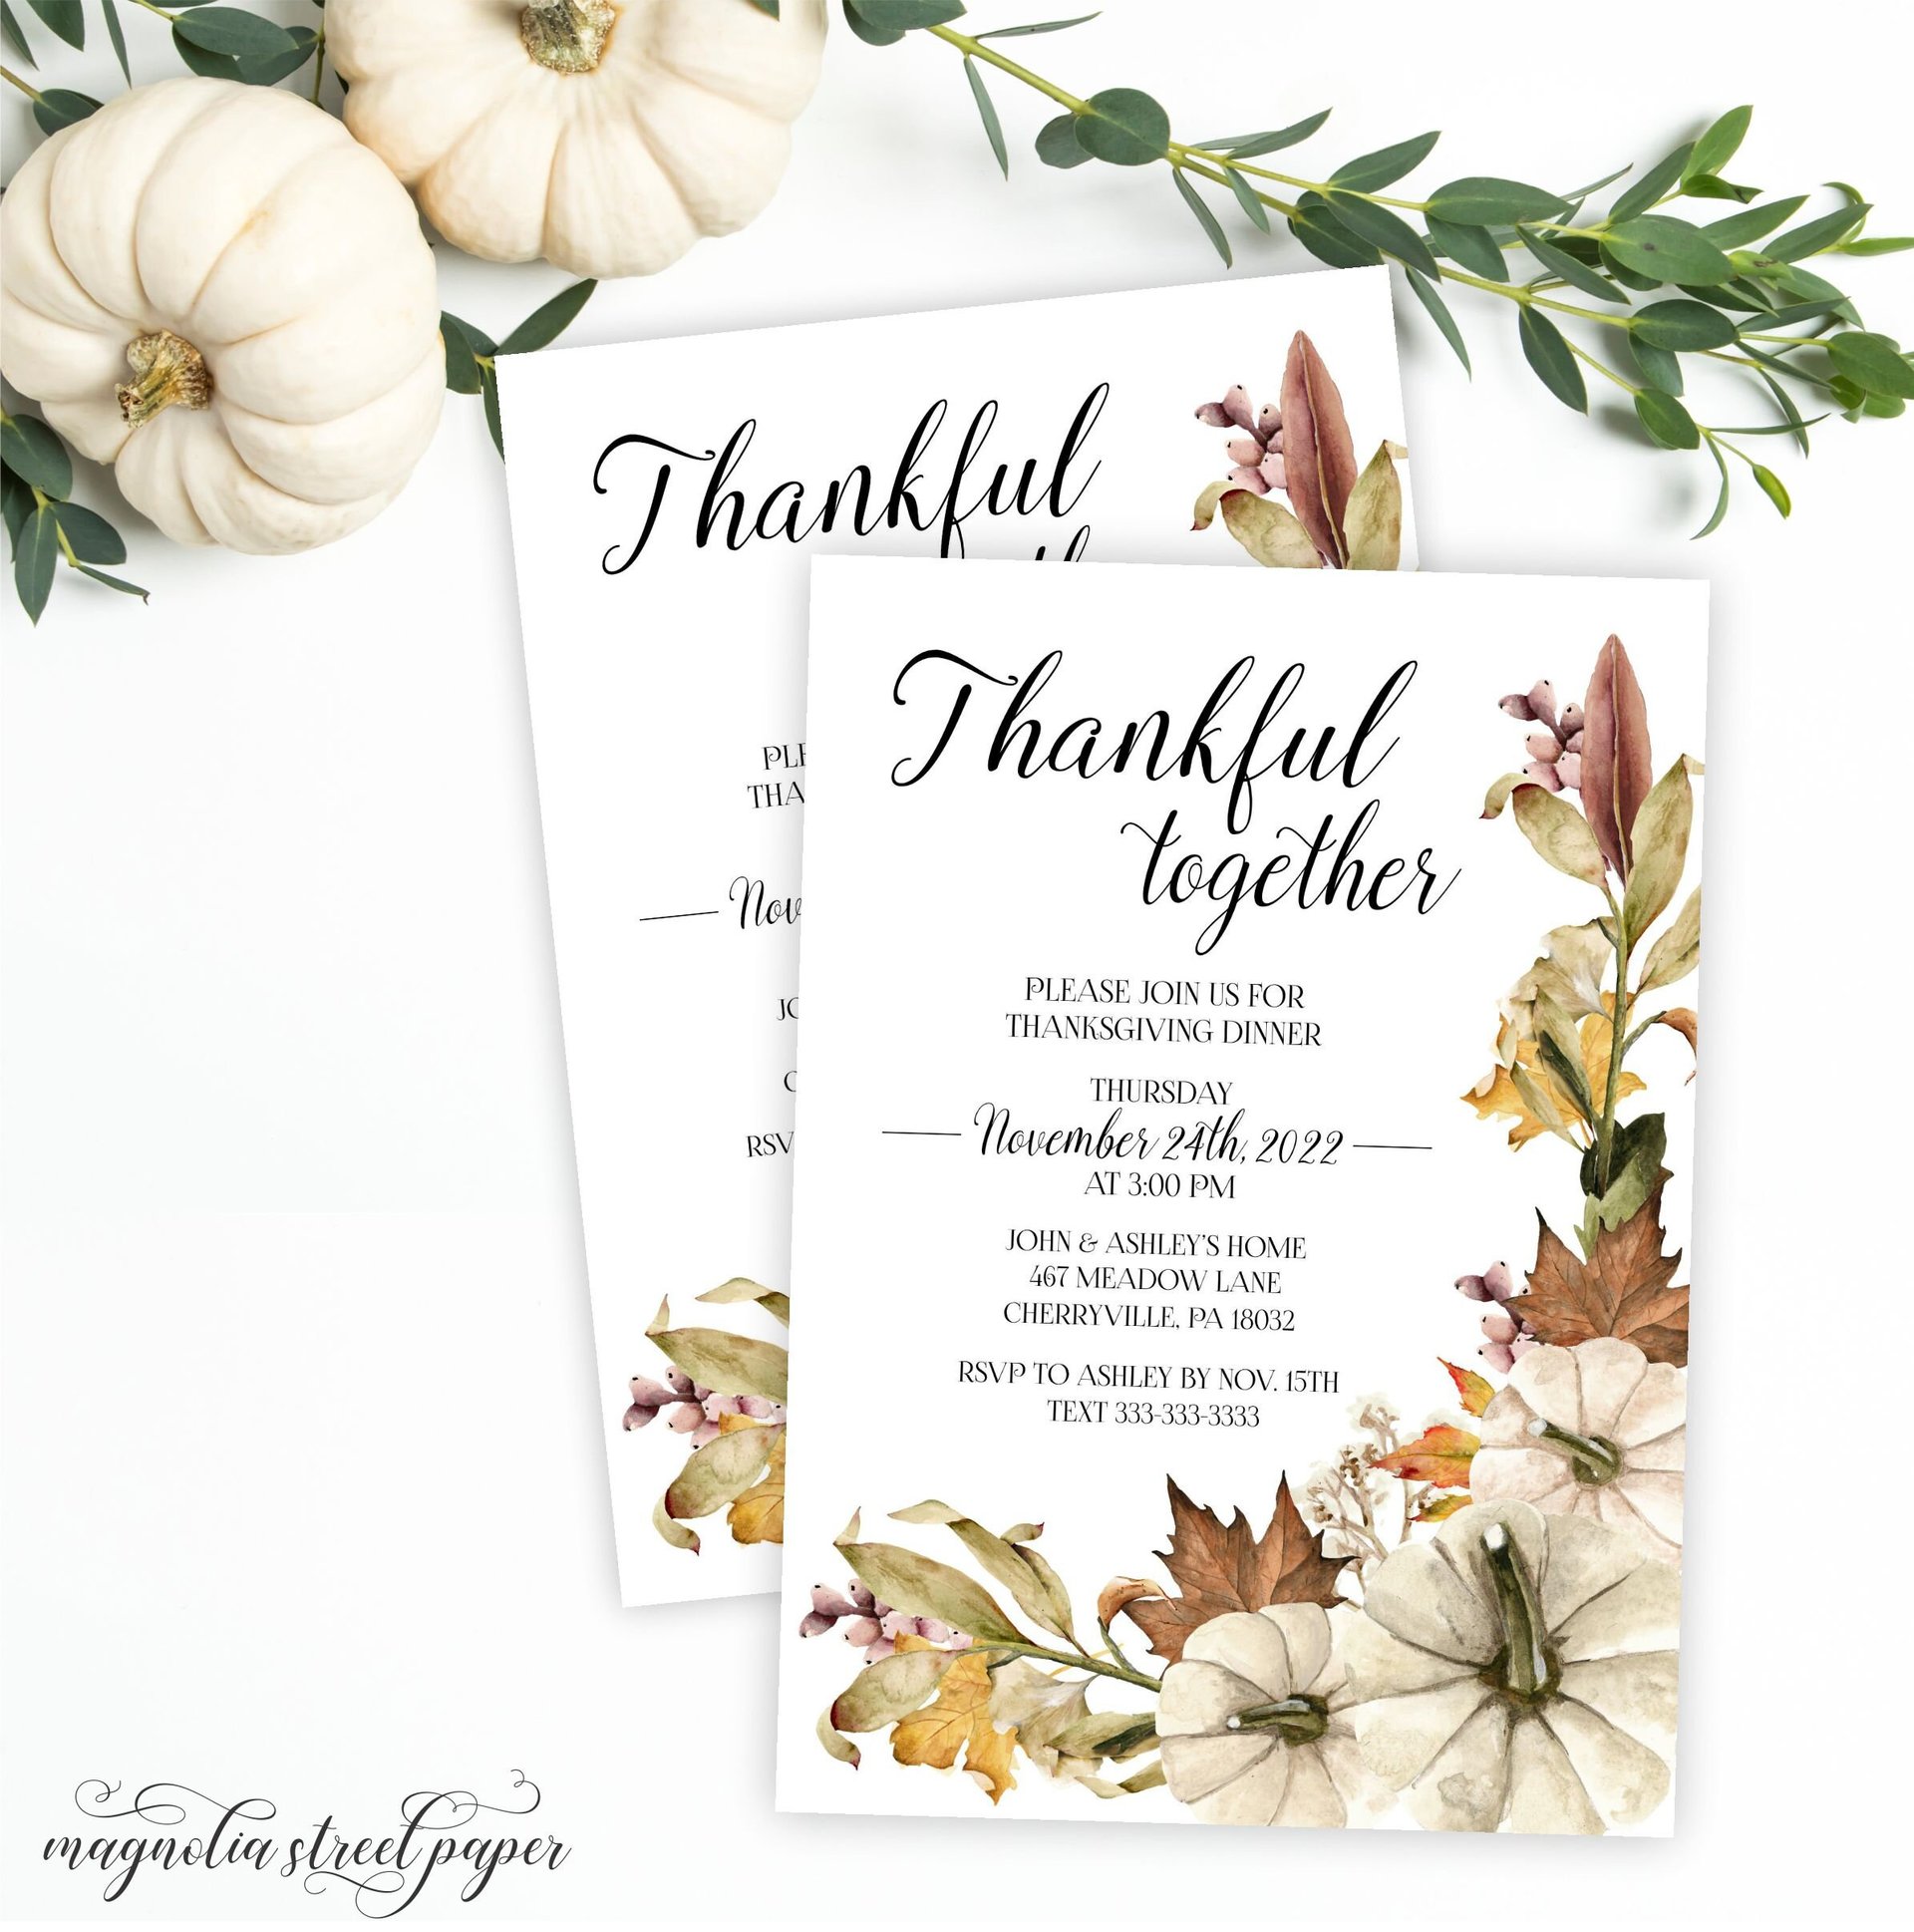 Thanksgiving Dinner Invitation, White Pumpkins and Fall Leaves